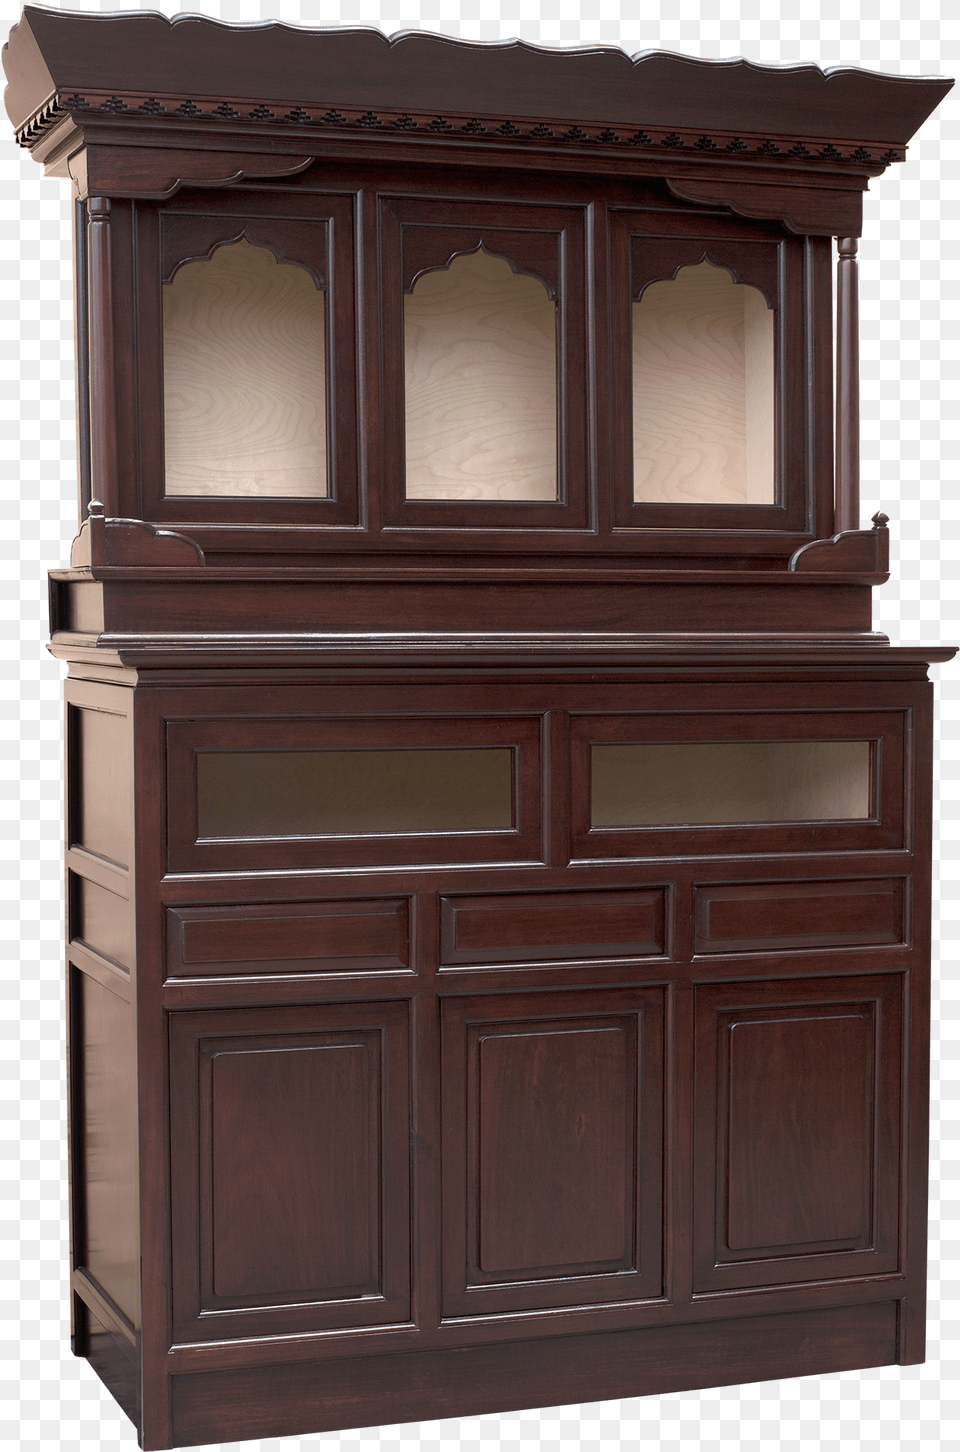 Traditional Tibetan Altar Cabinet Cupboard Designs In Nepal, Closet, Furniture, Sideboard, China Cabinet Free Png